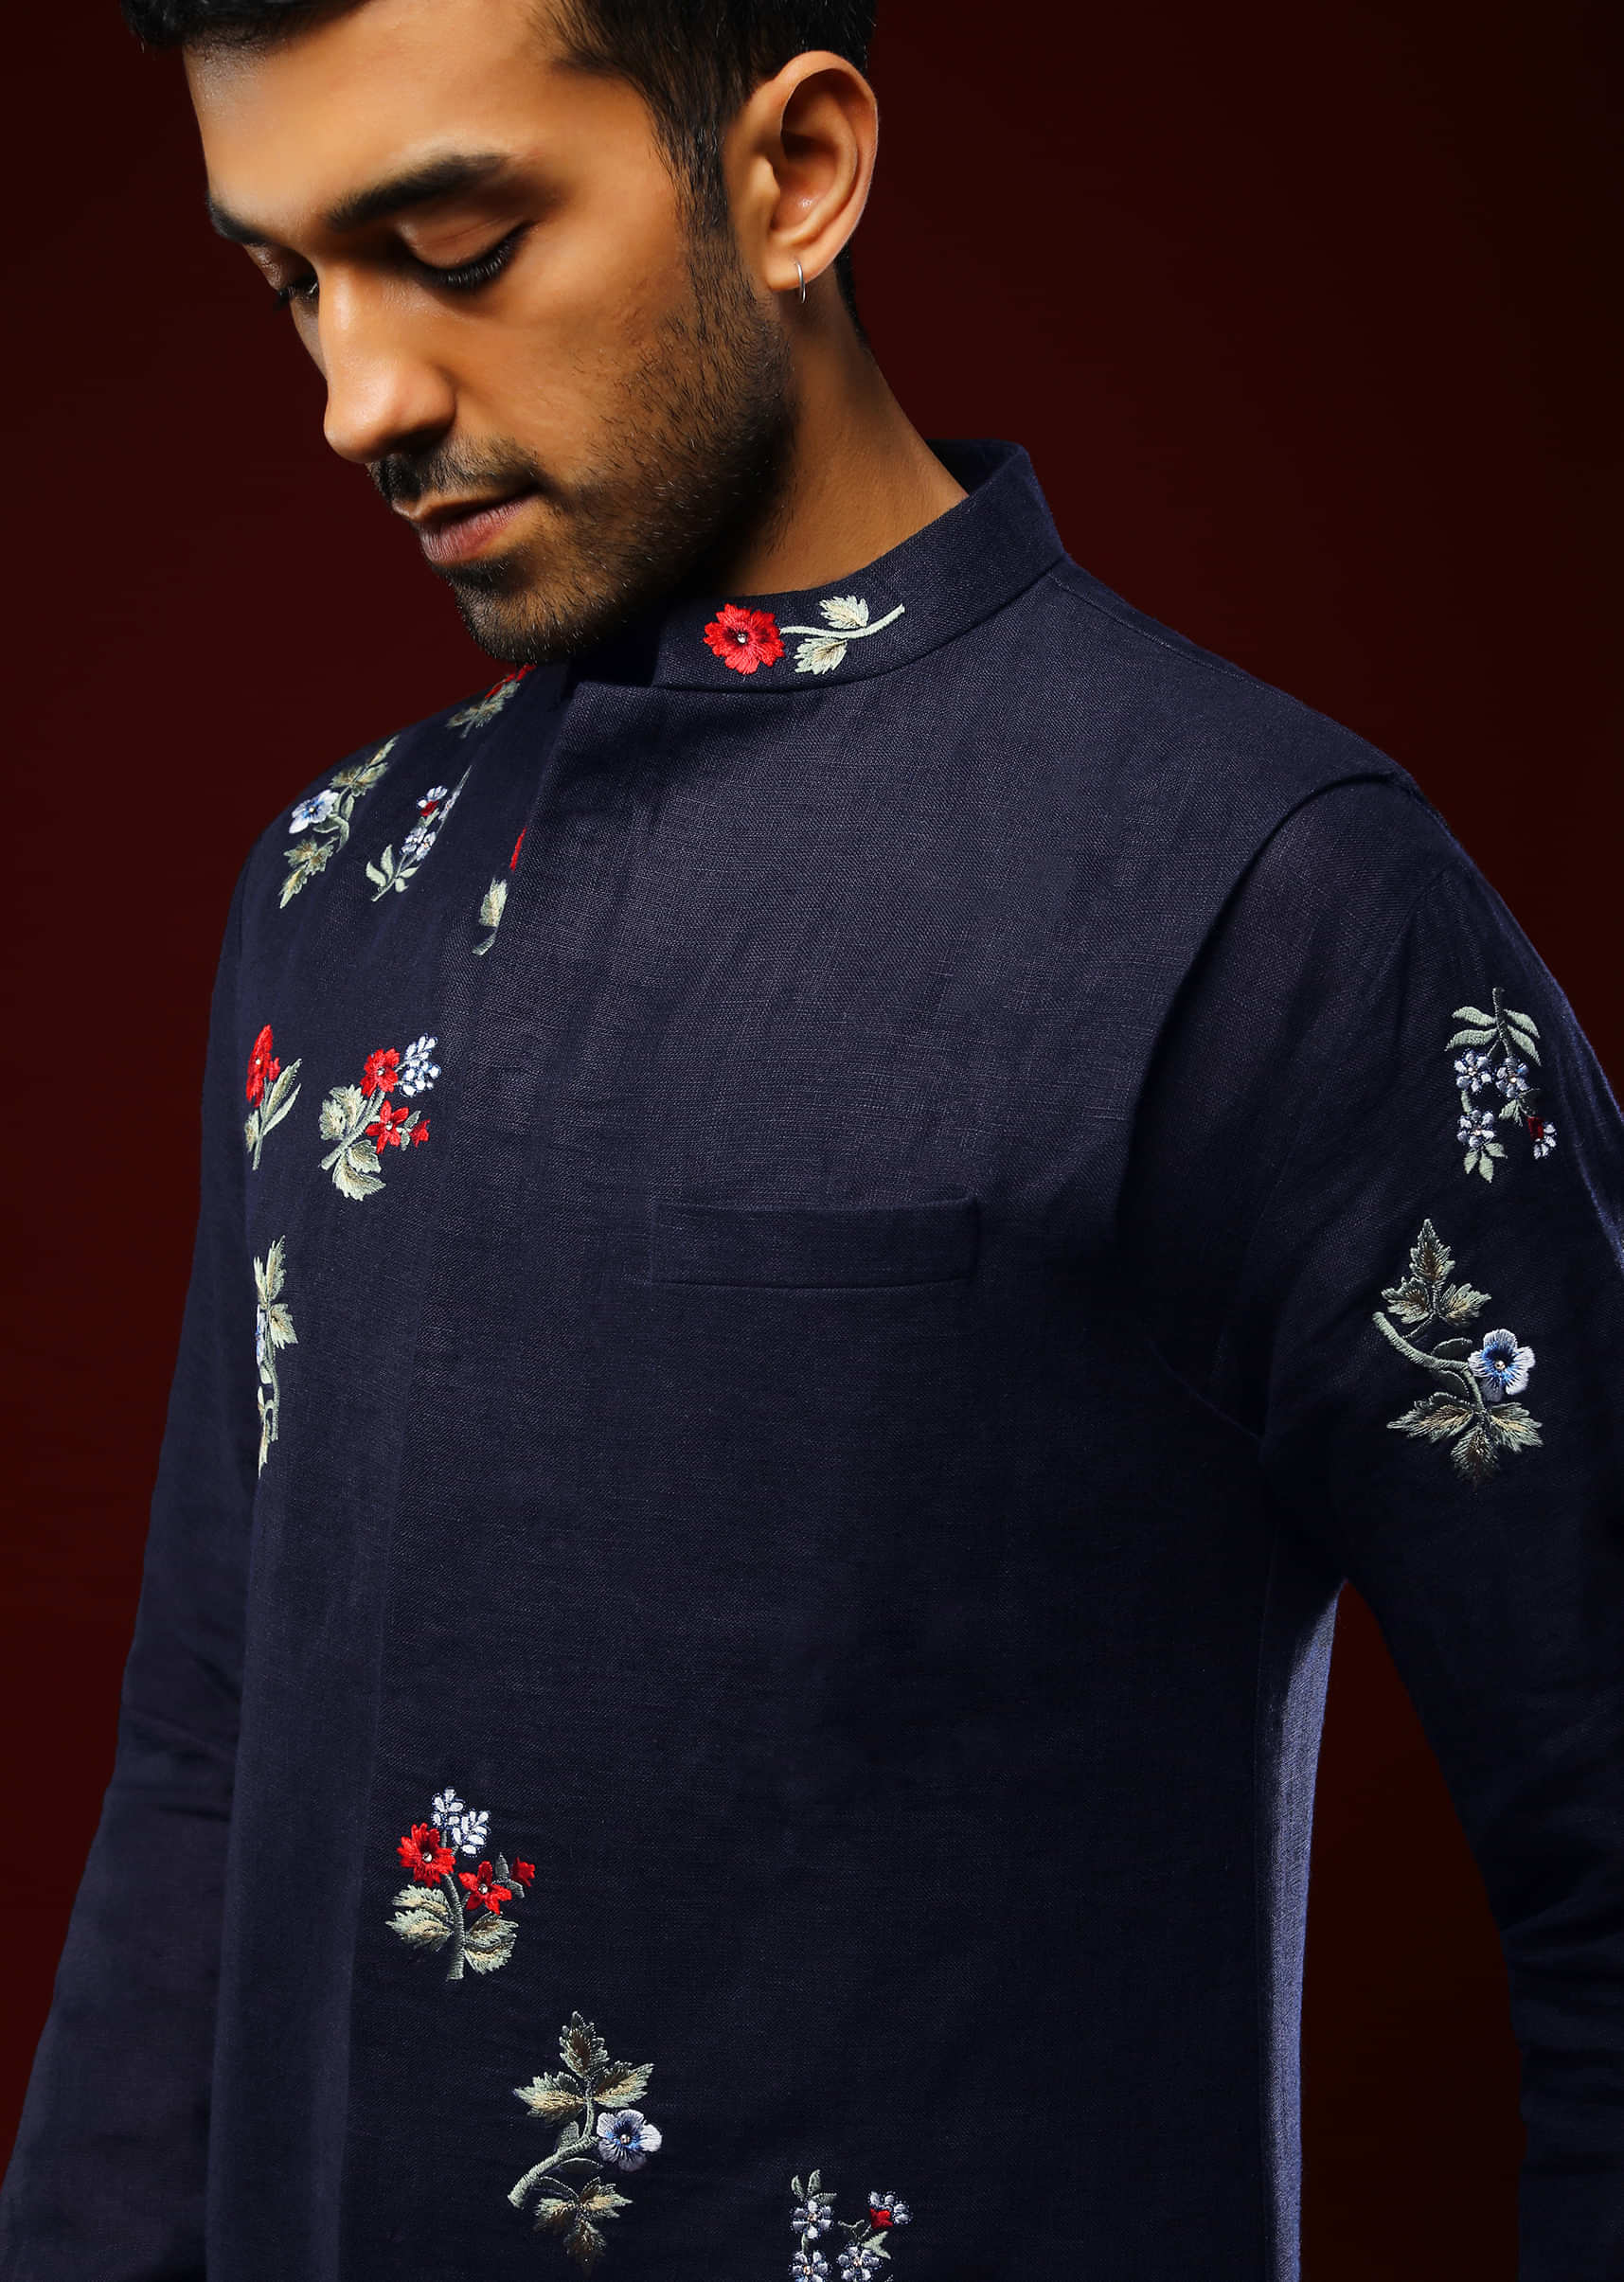 Midnight Blue Nehru Jacket Set In Linen With Multi Colored Resham Embroidered Floral Motifs